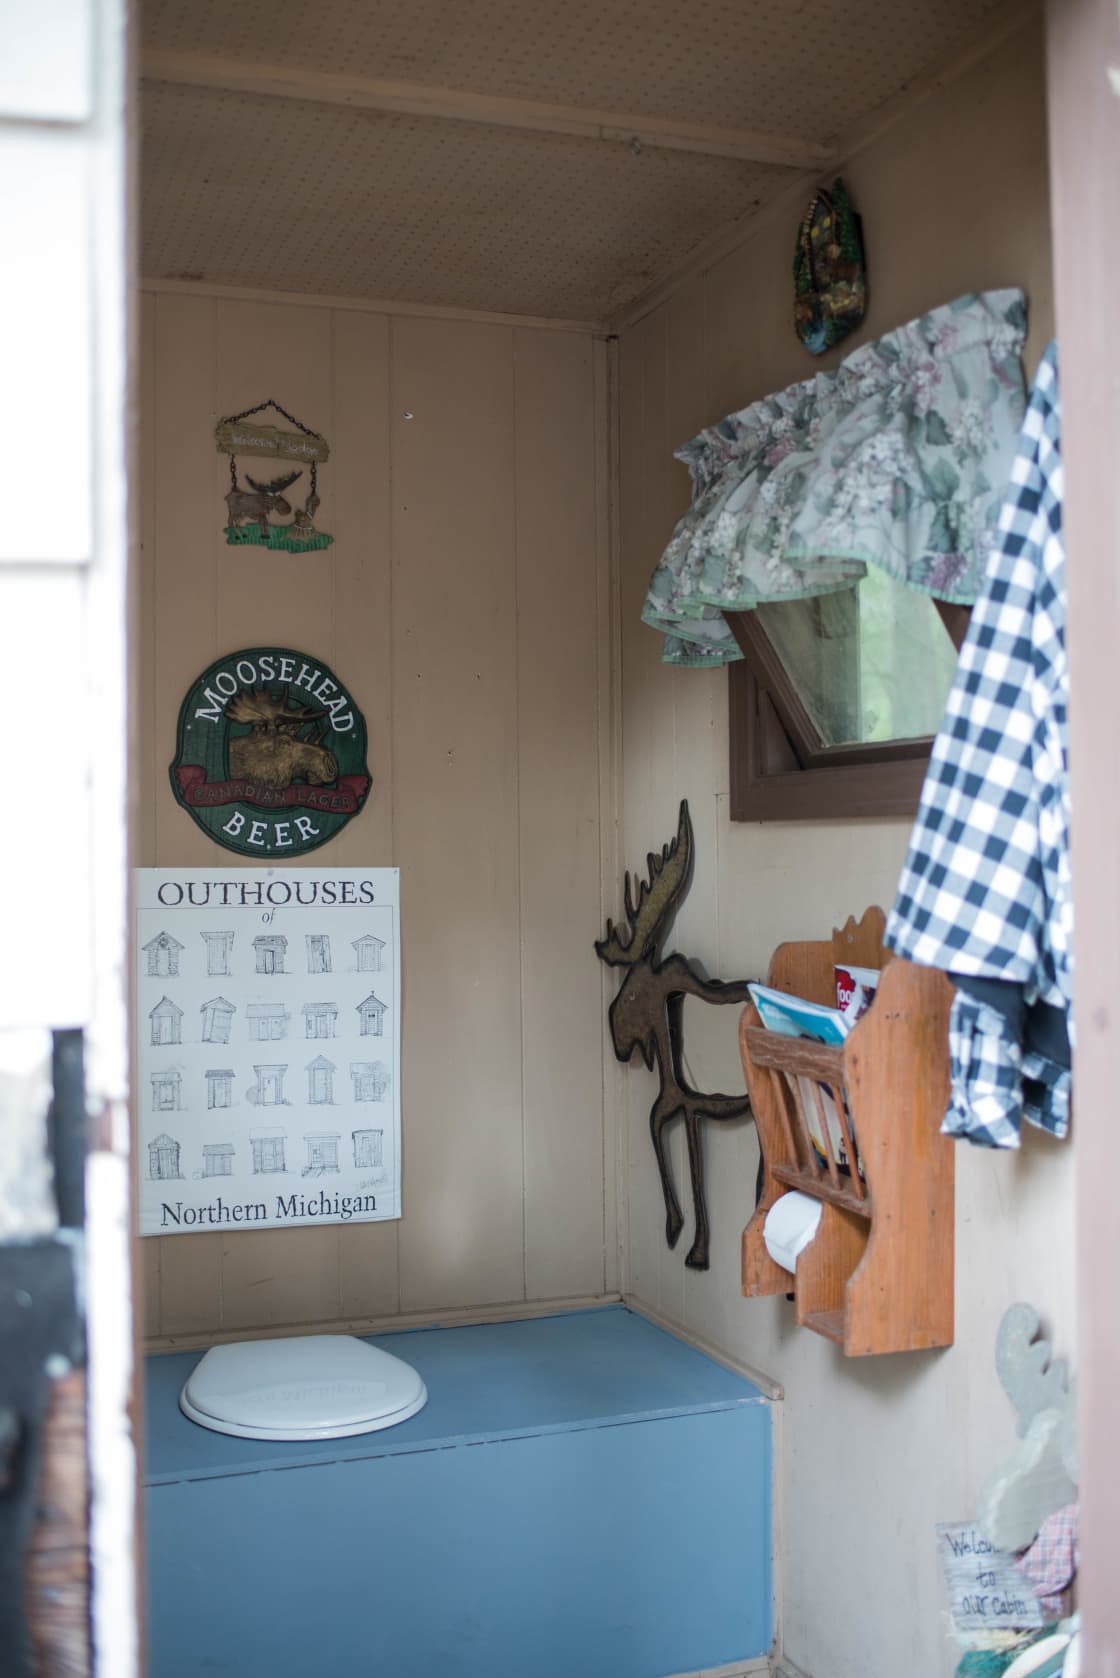 The inside of the outhouse is adorable! Judy did a fantastic job decking it out and making it so homey